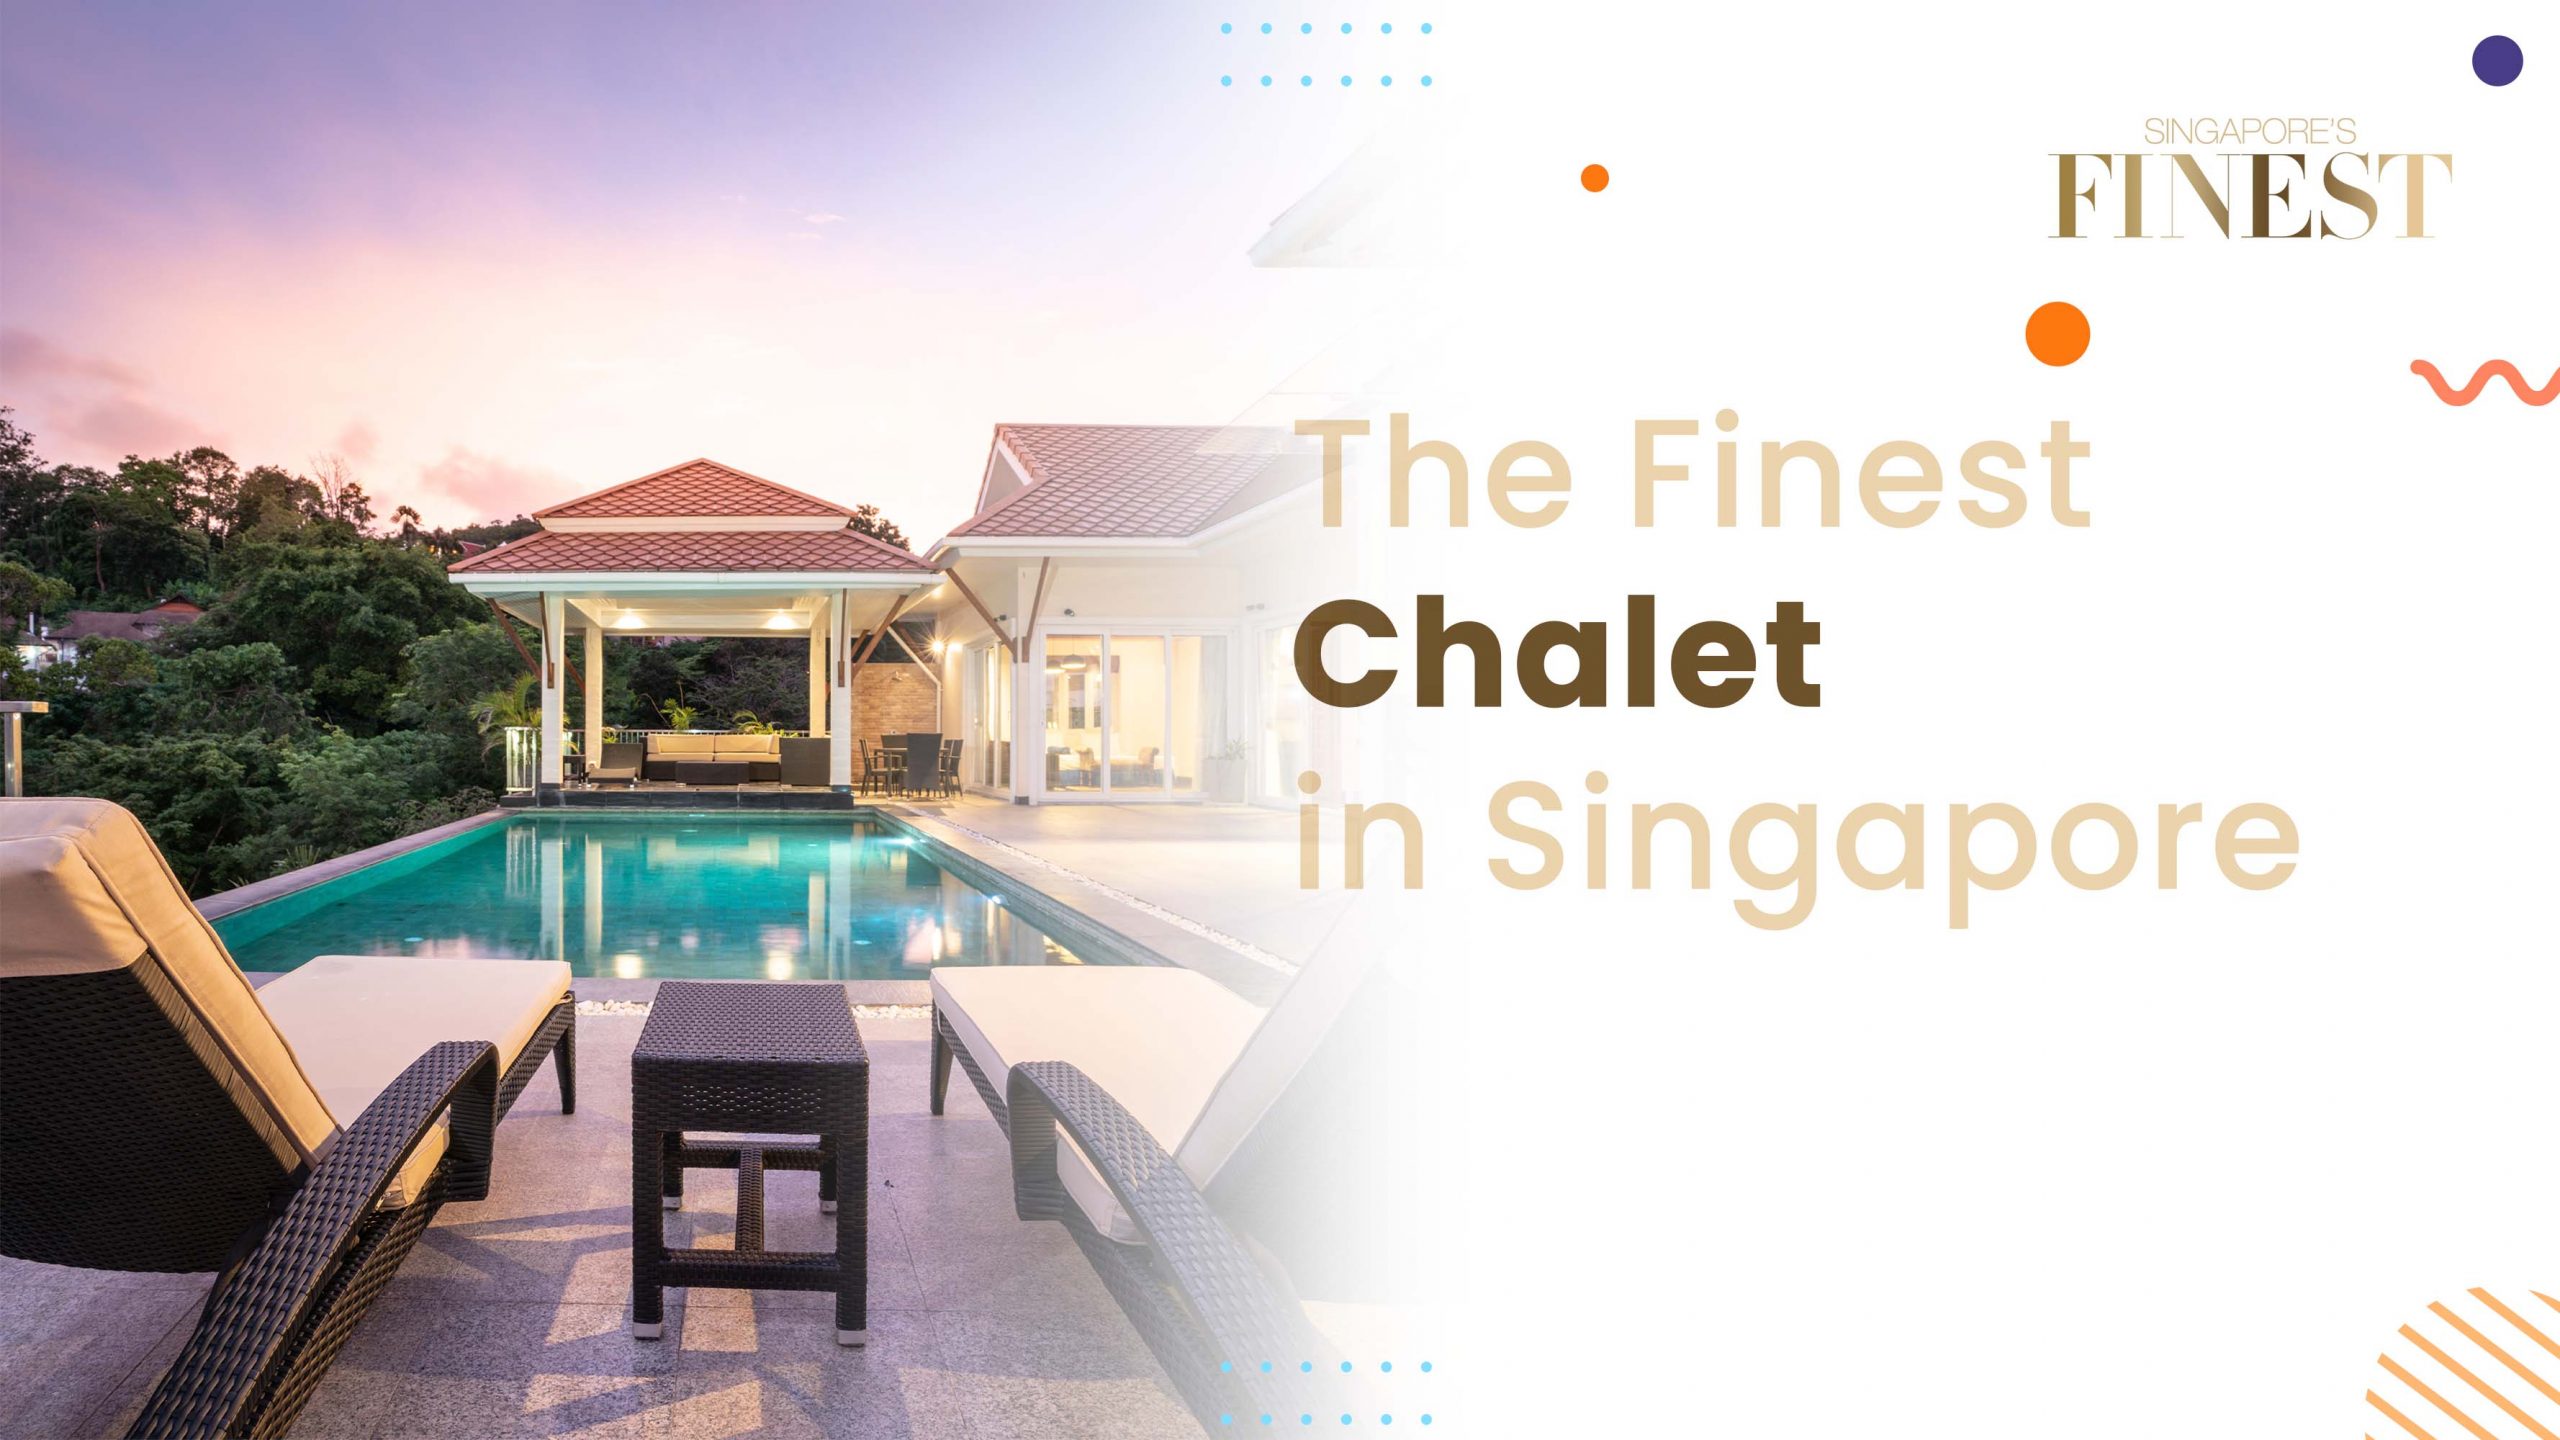 The Finest Chalet in Singapore